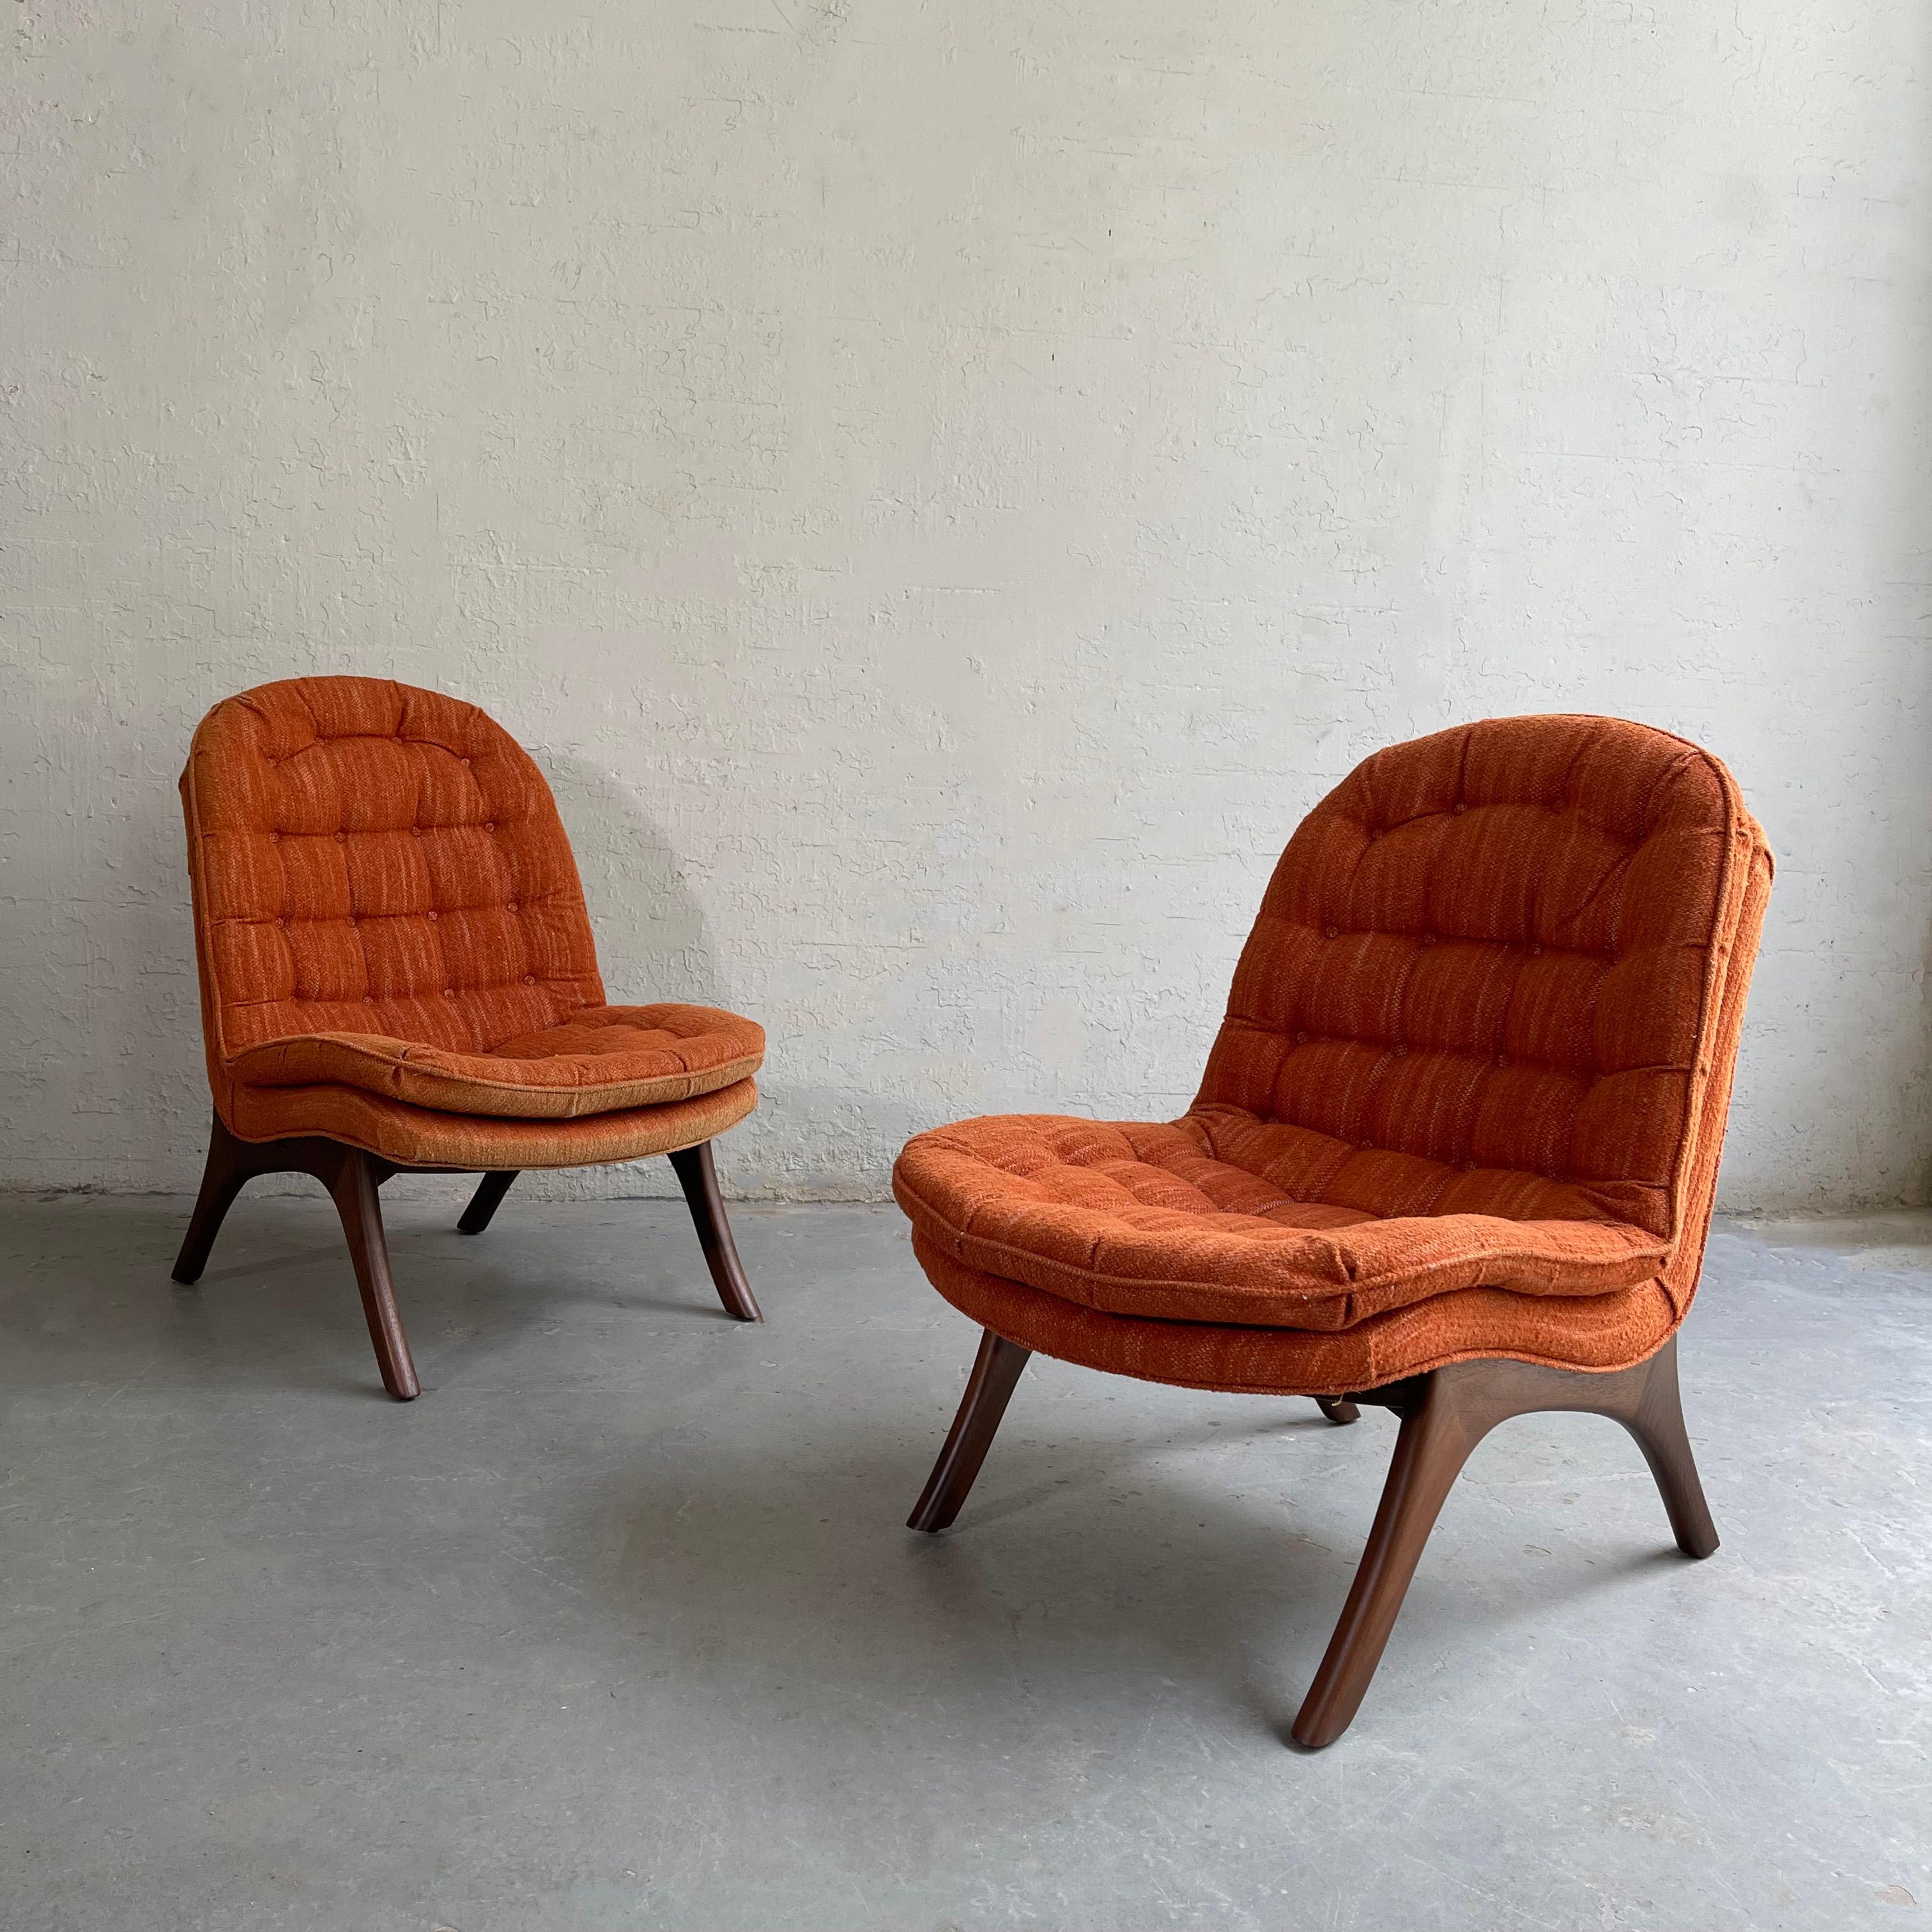 American Mid-Century Modern Slipper Chairs By Adrian Pearsall For Craft Associates